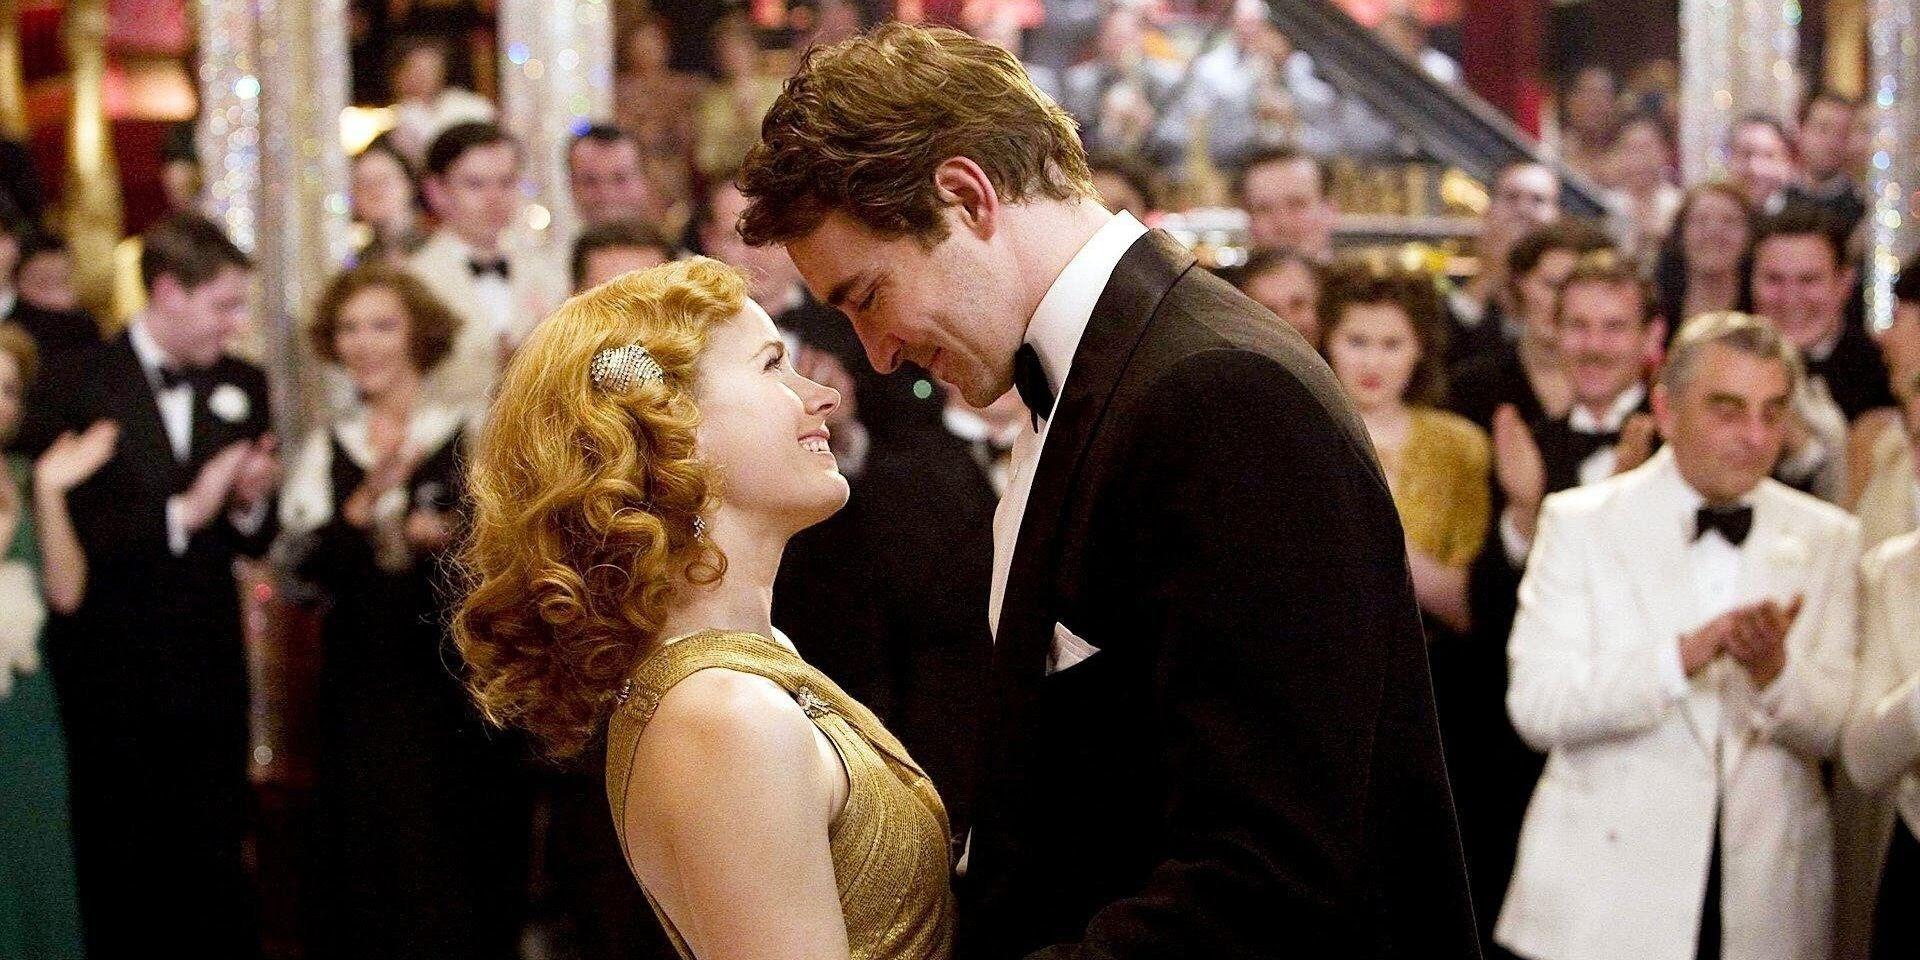 A still from Miss Pettigrew Lives for a Day, featuring Amy Adams and Lee Pace